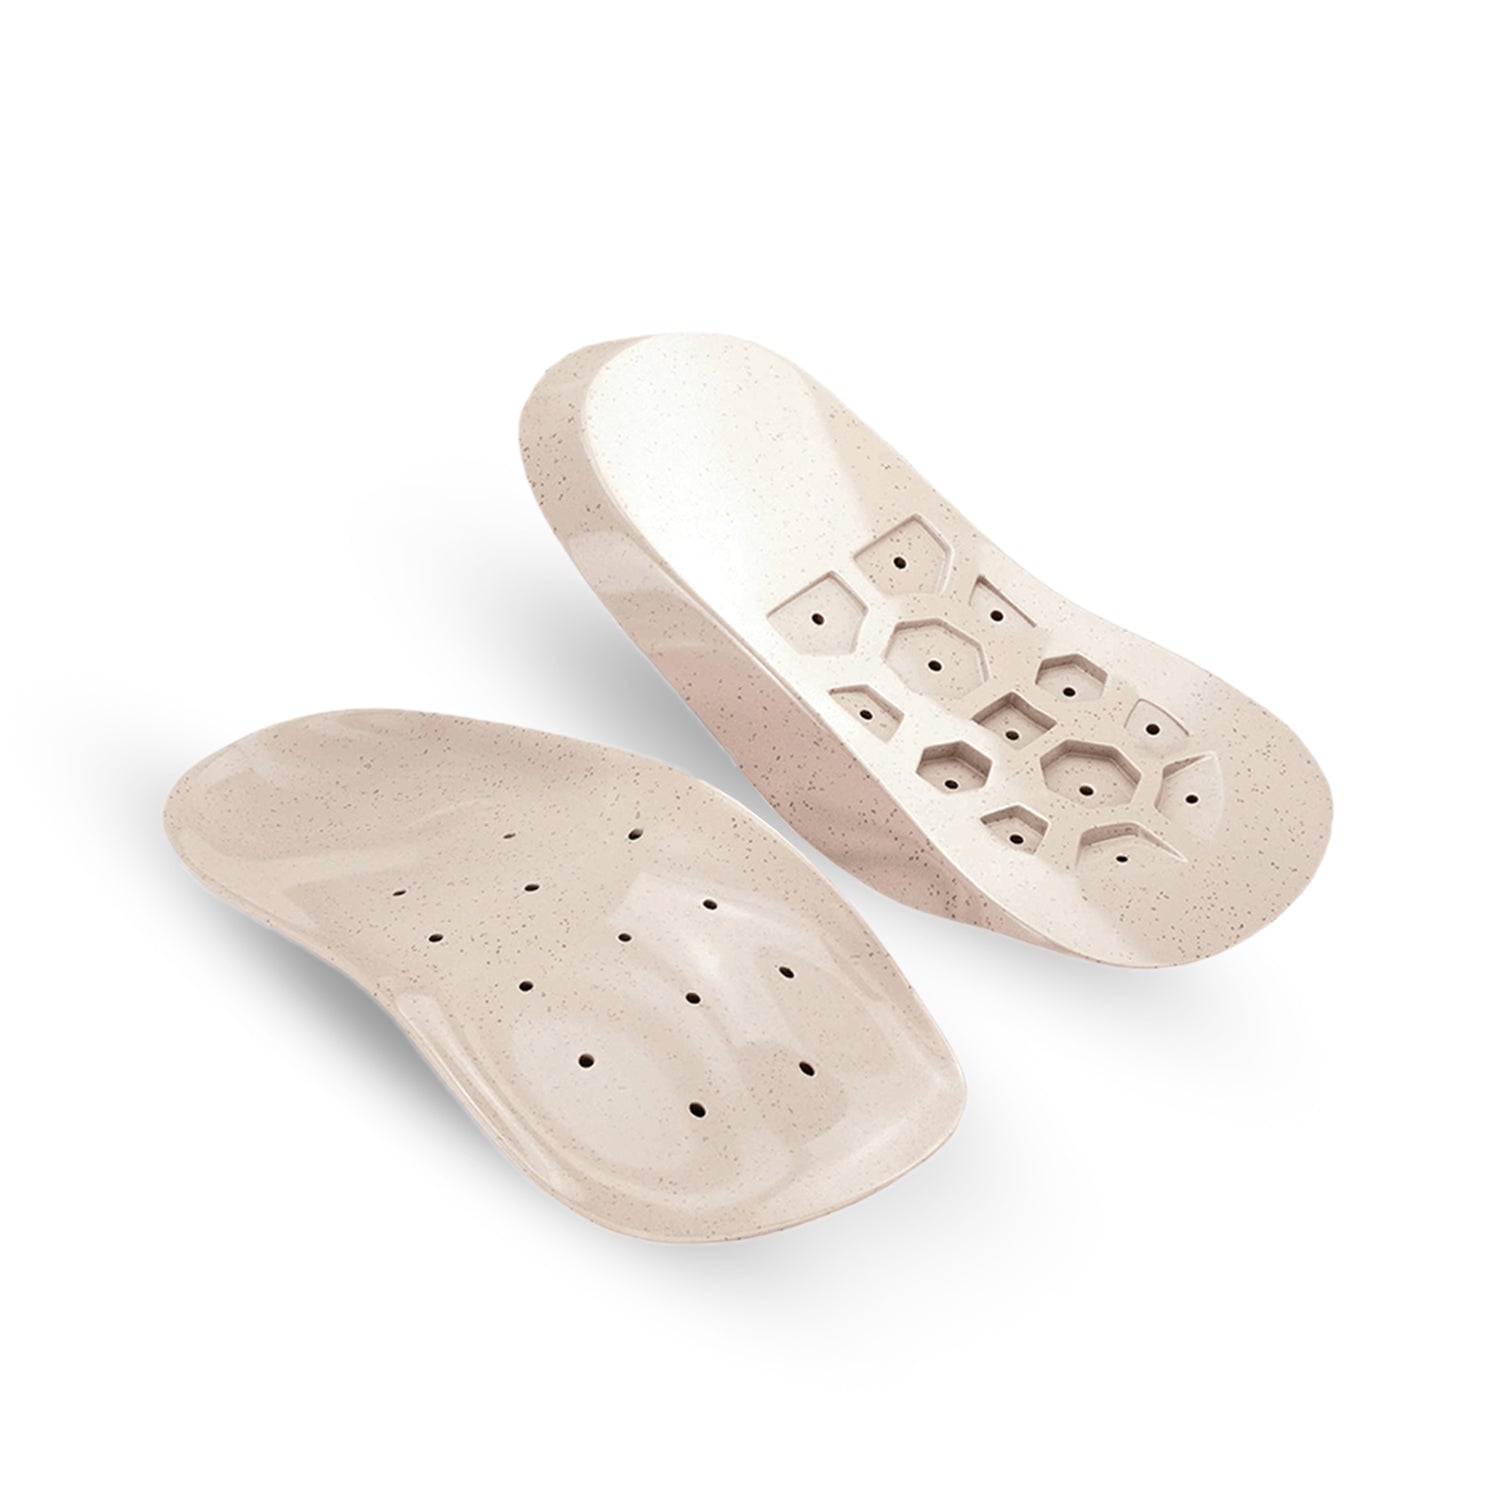 Original Stabilizer  | Arch Support Insert for High Arches